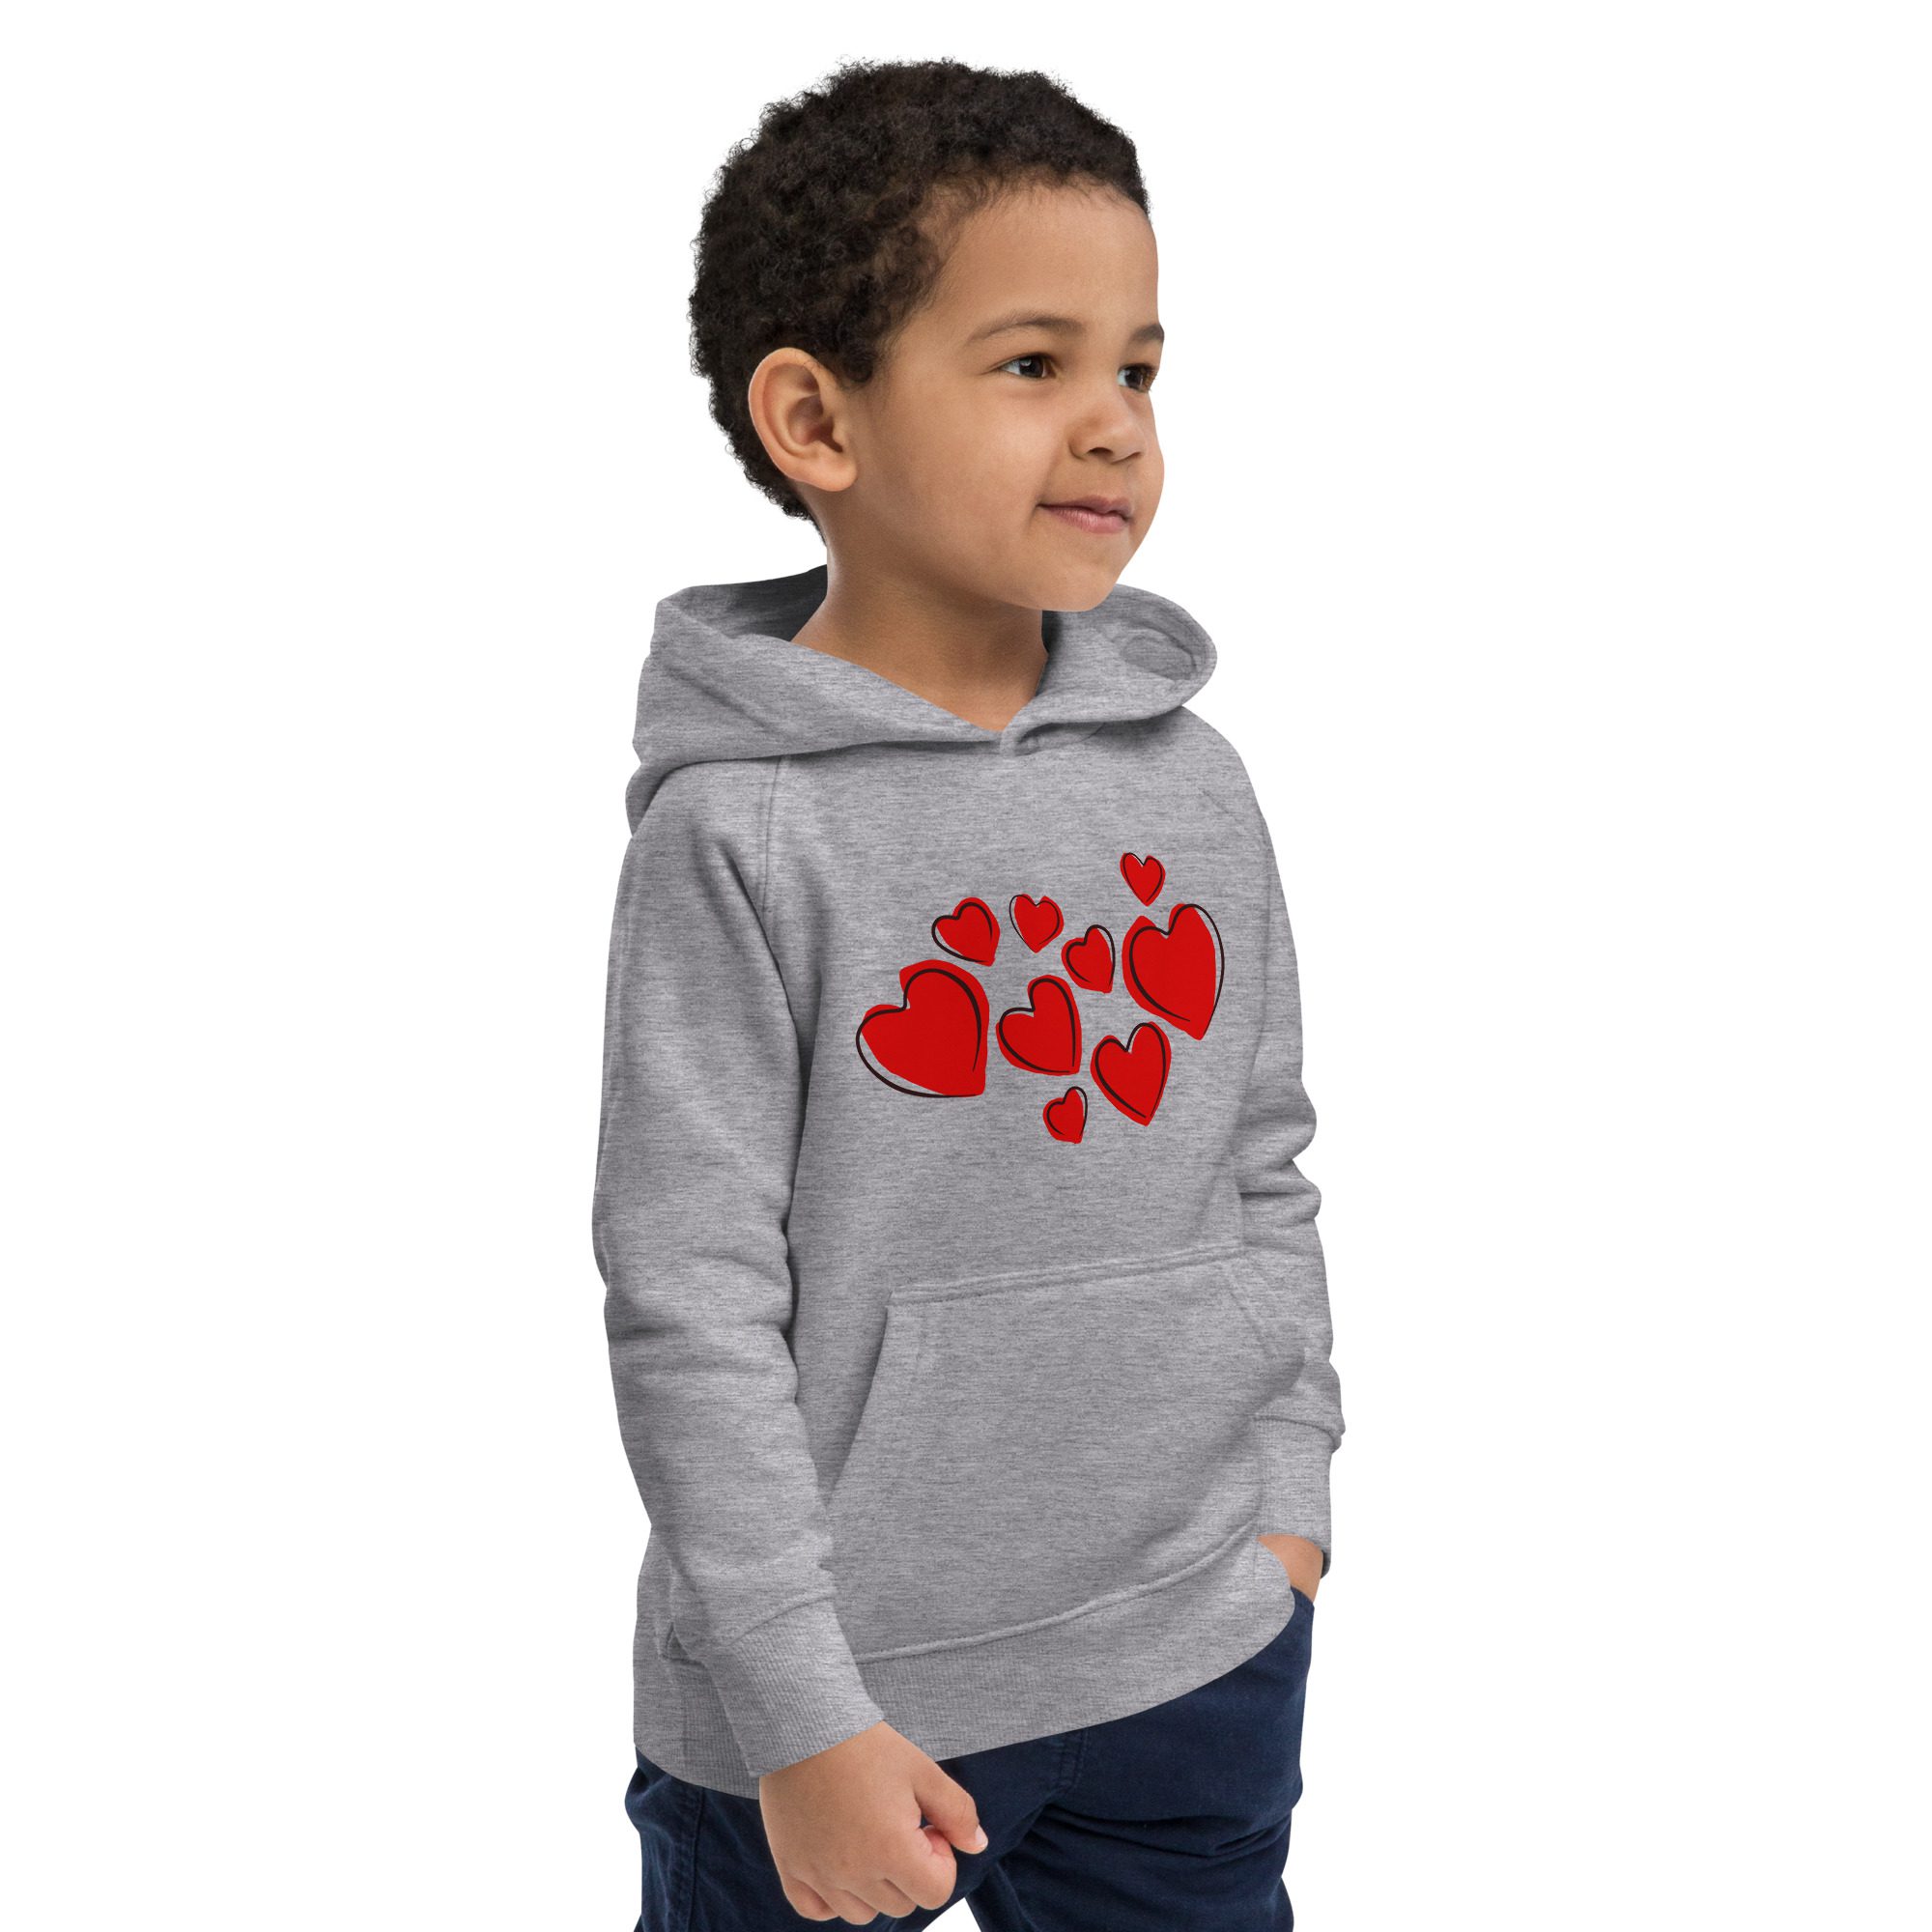 kids eco hoodie grey melange right front 651aaa7a34605